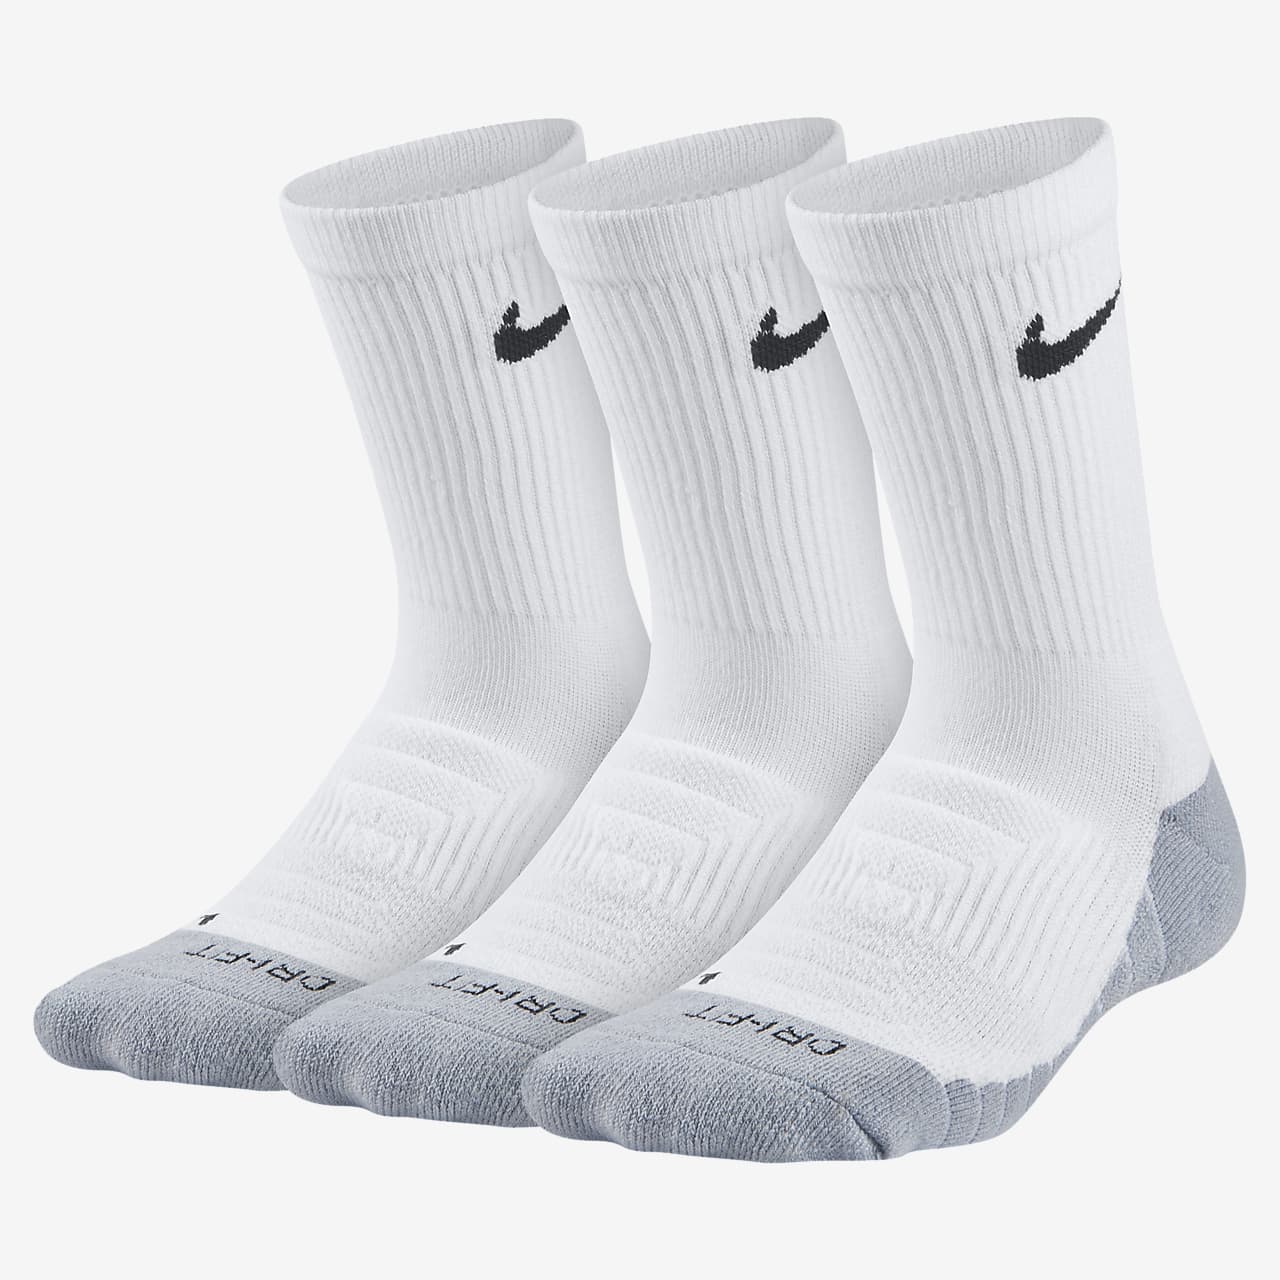 what are nike dri fit socks made of